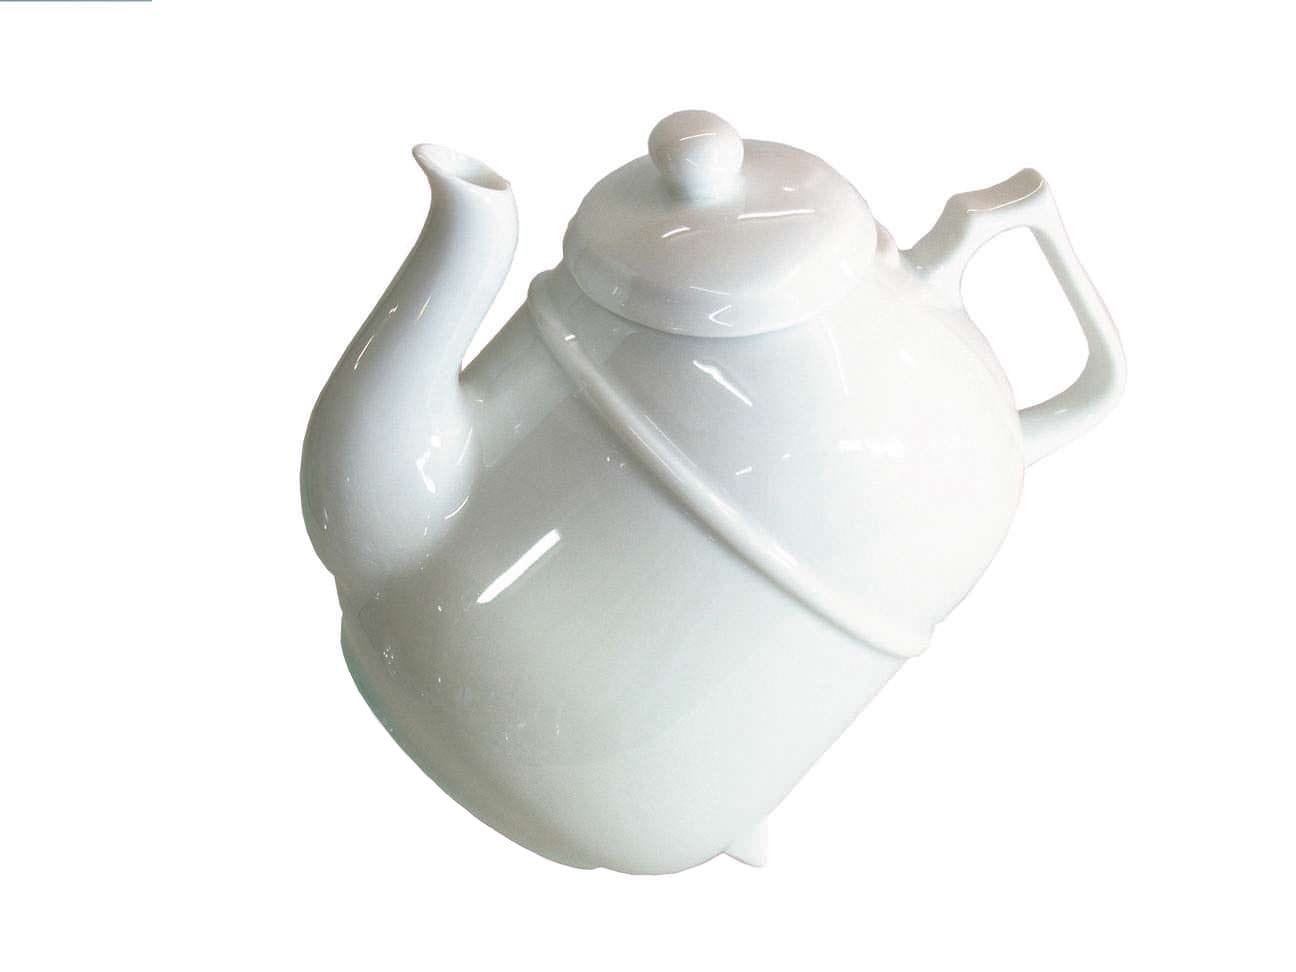 Tilting jug 0.4l made of white porcelain in a gift box